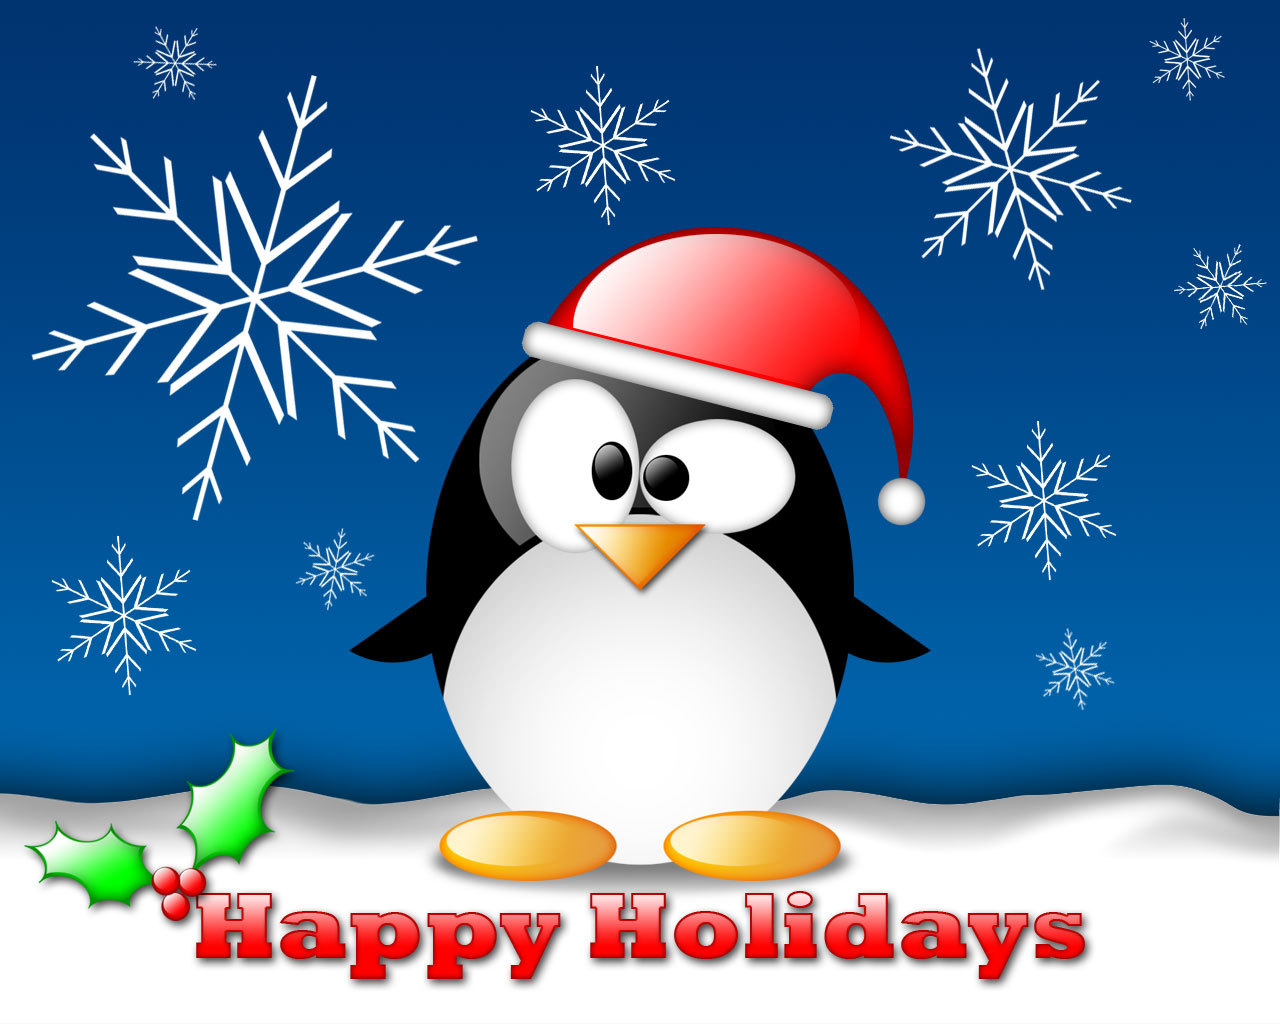 Funny wallpapersHD wallpapers cute christmas wallpapers